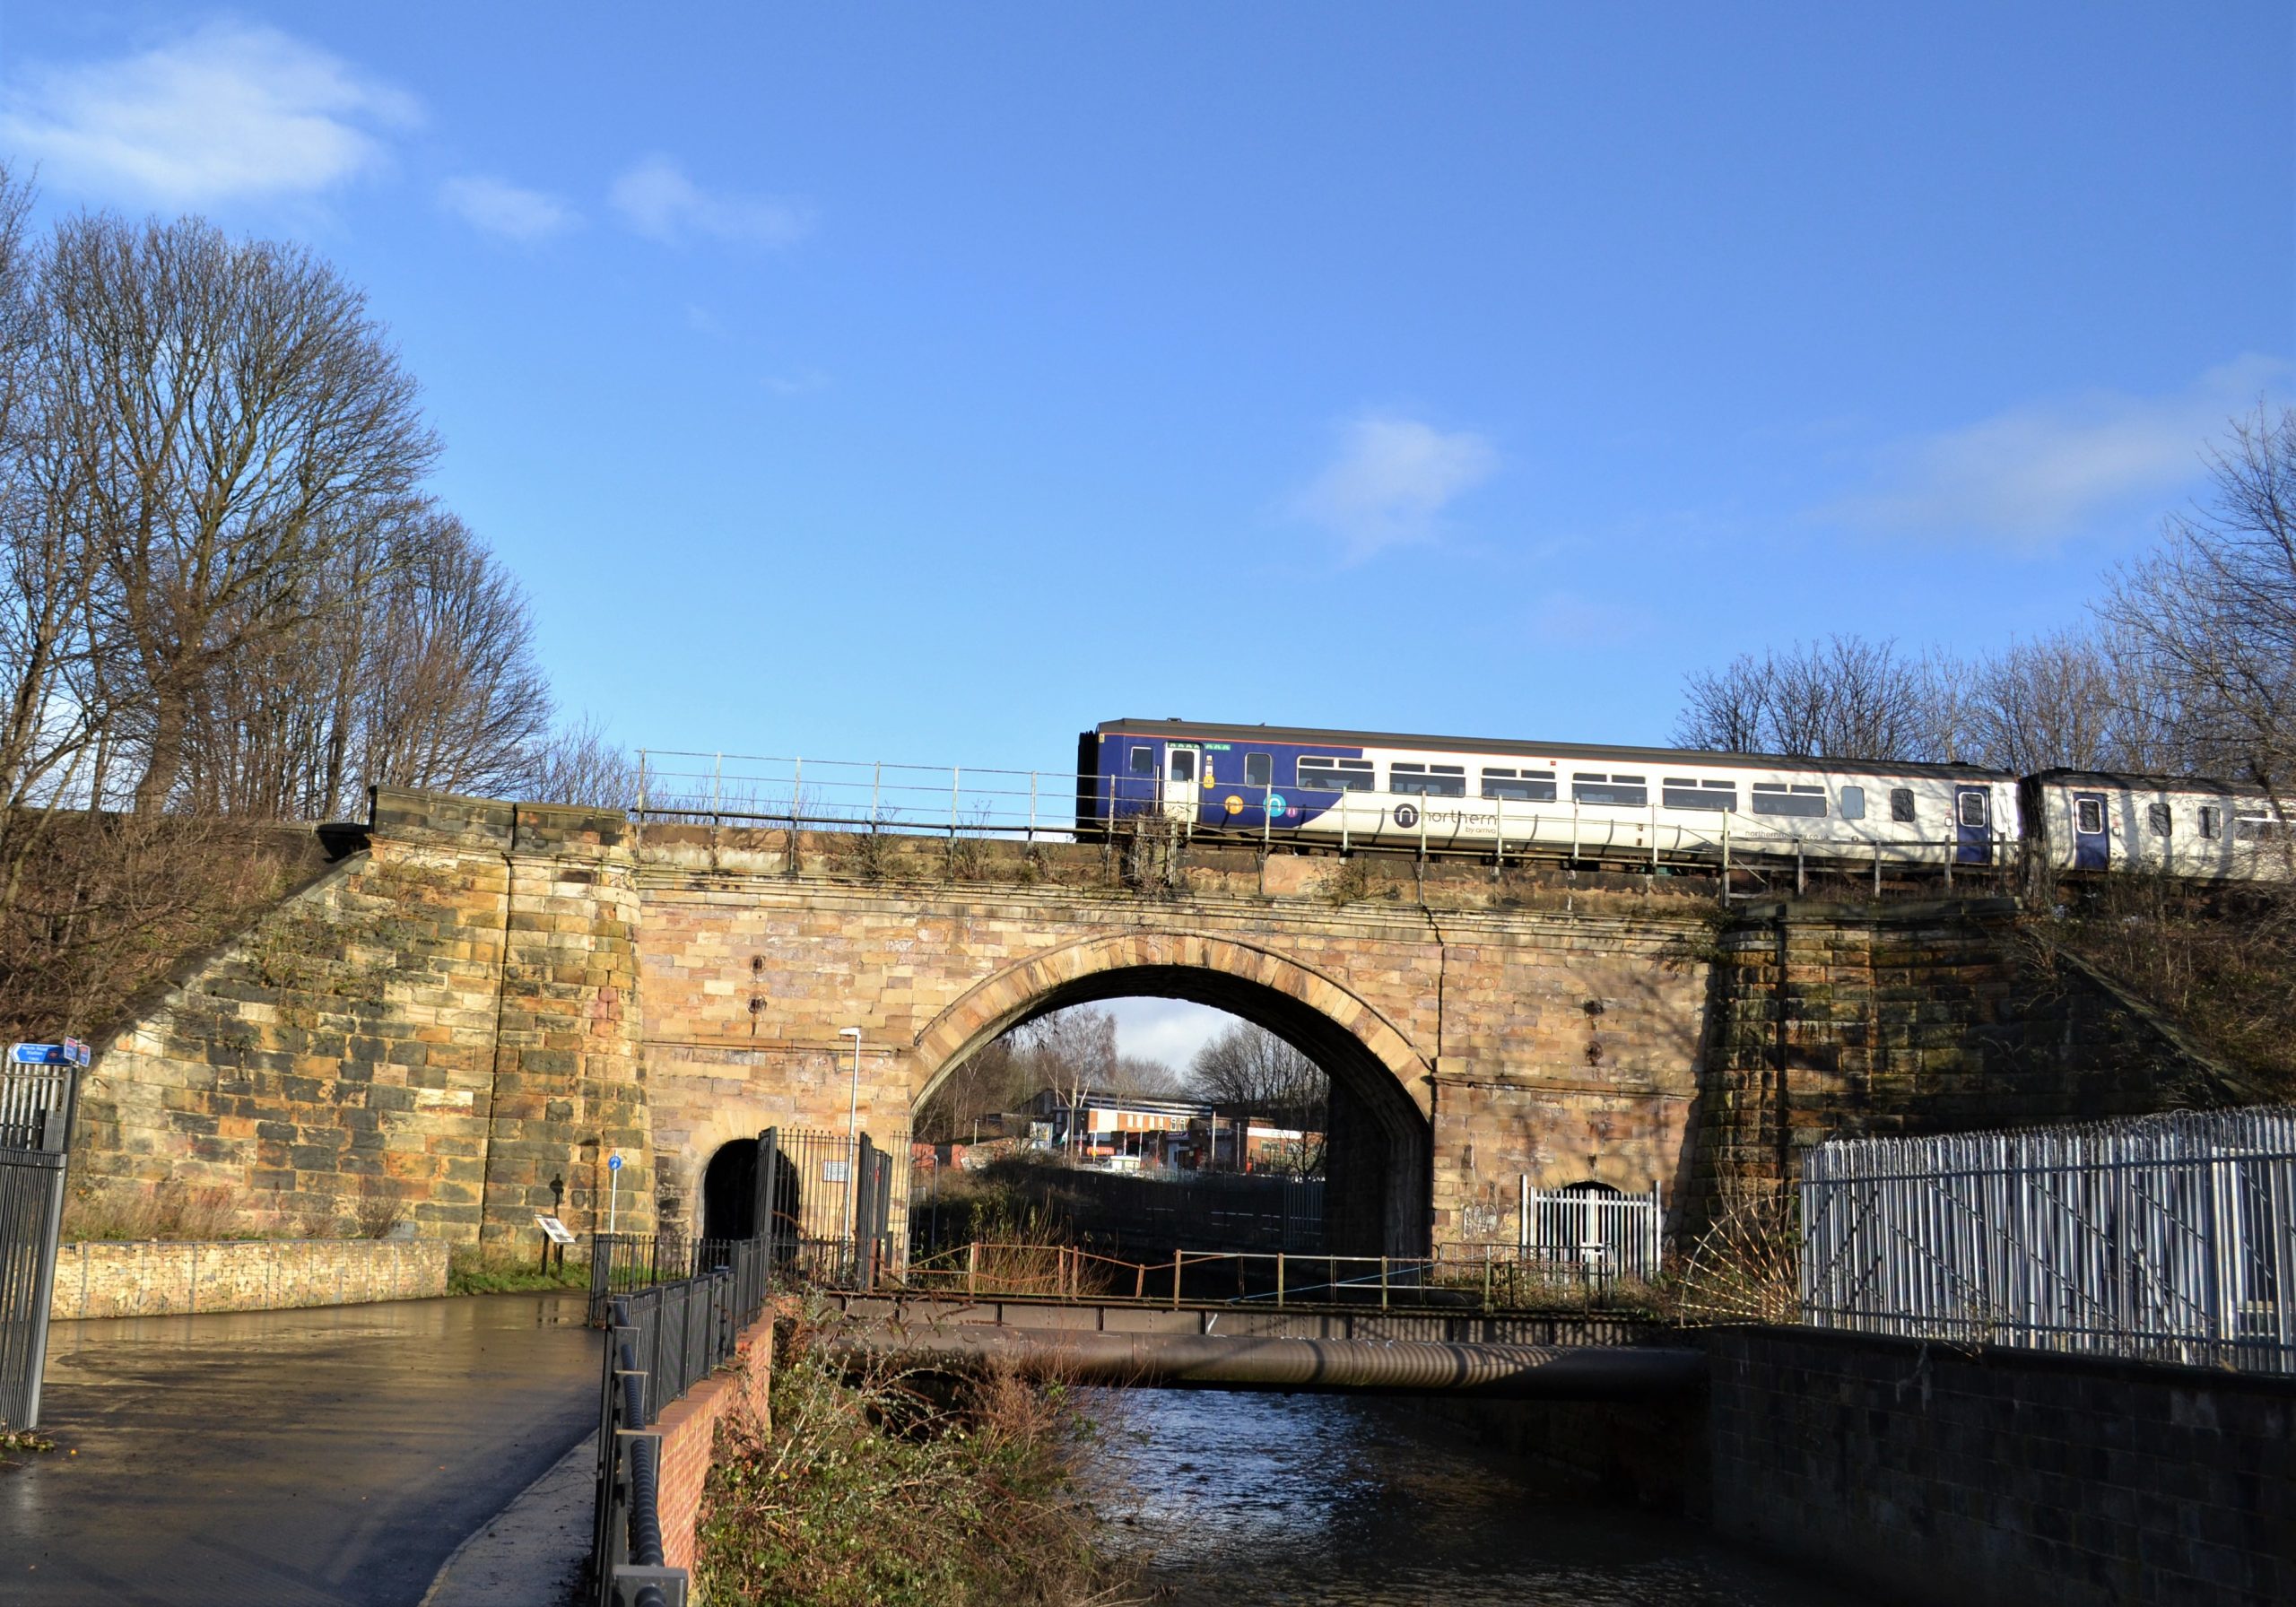 Northern Train going over Skerne Bridge - Phot by John Asquith